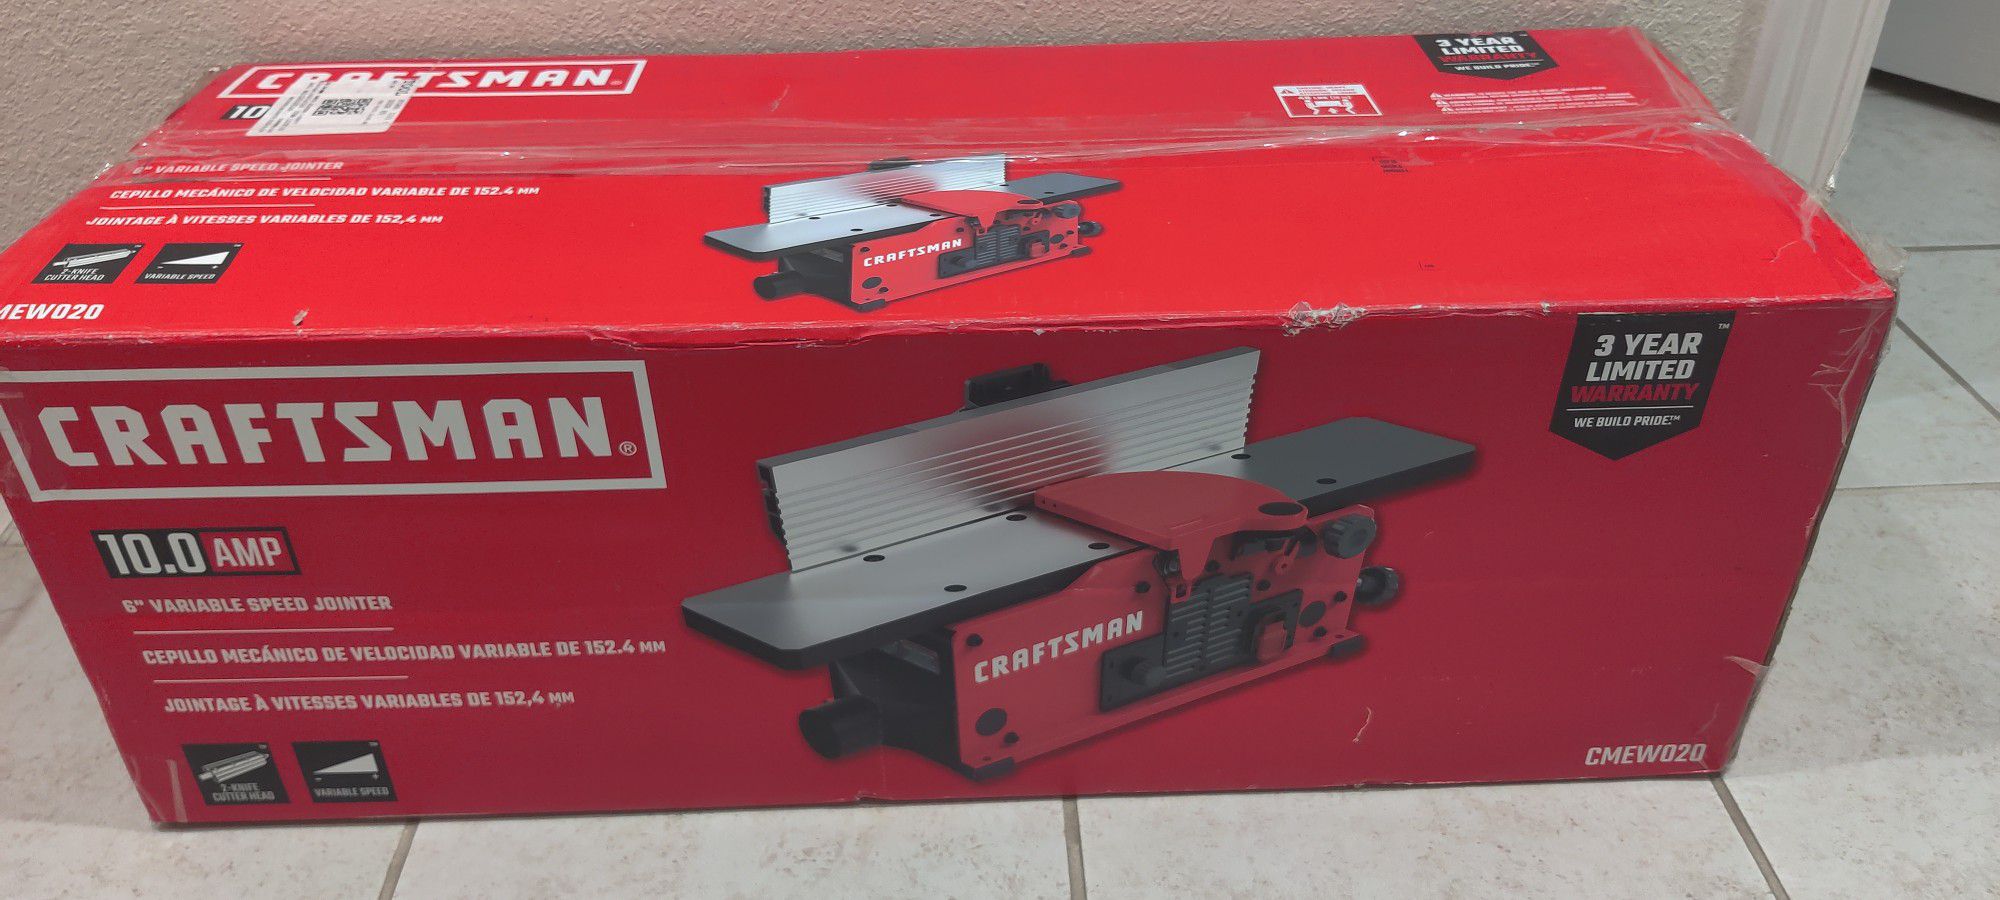 Craftsman 10 Amps BENCH Jointer - New